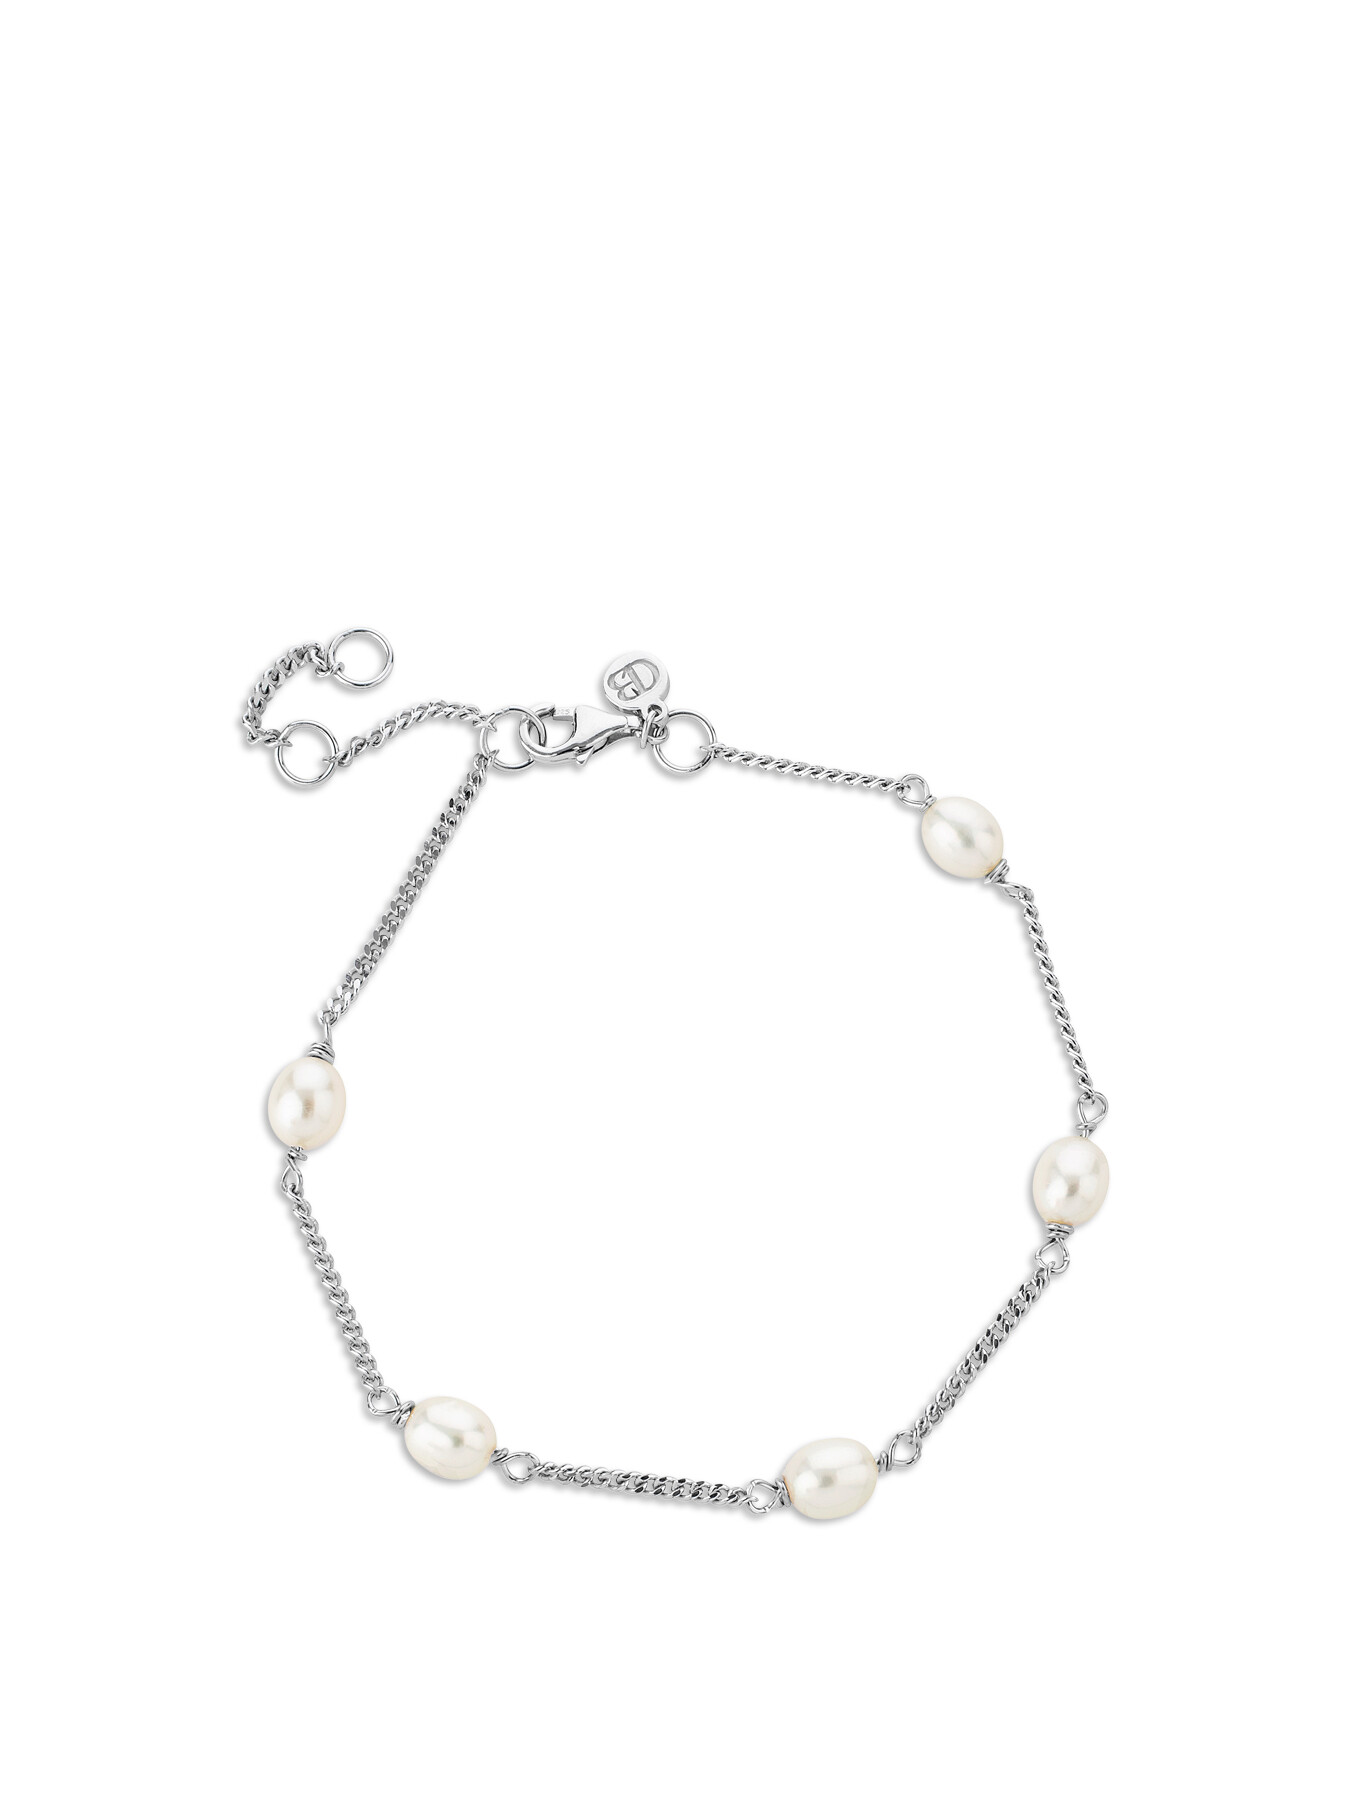 Claudia Bradby Women's Simple Pearl And Chain Bracelet Silver